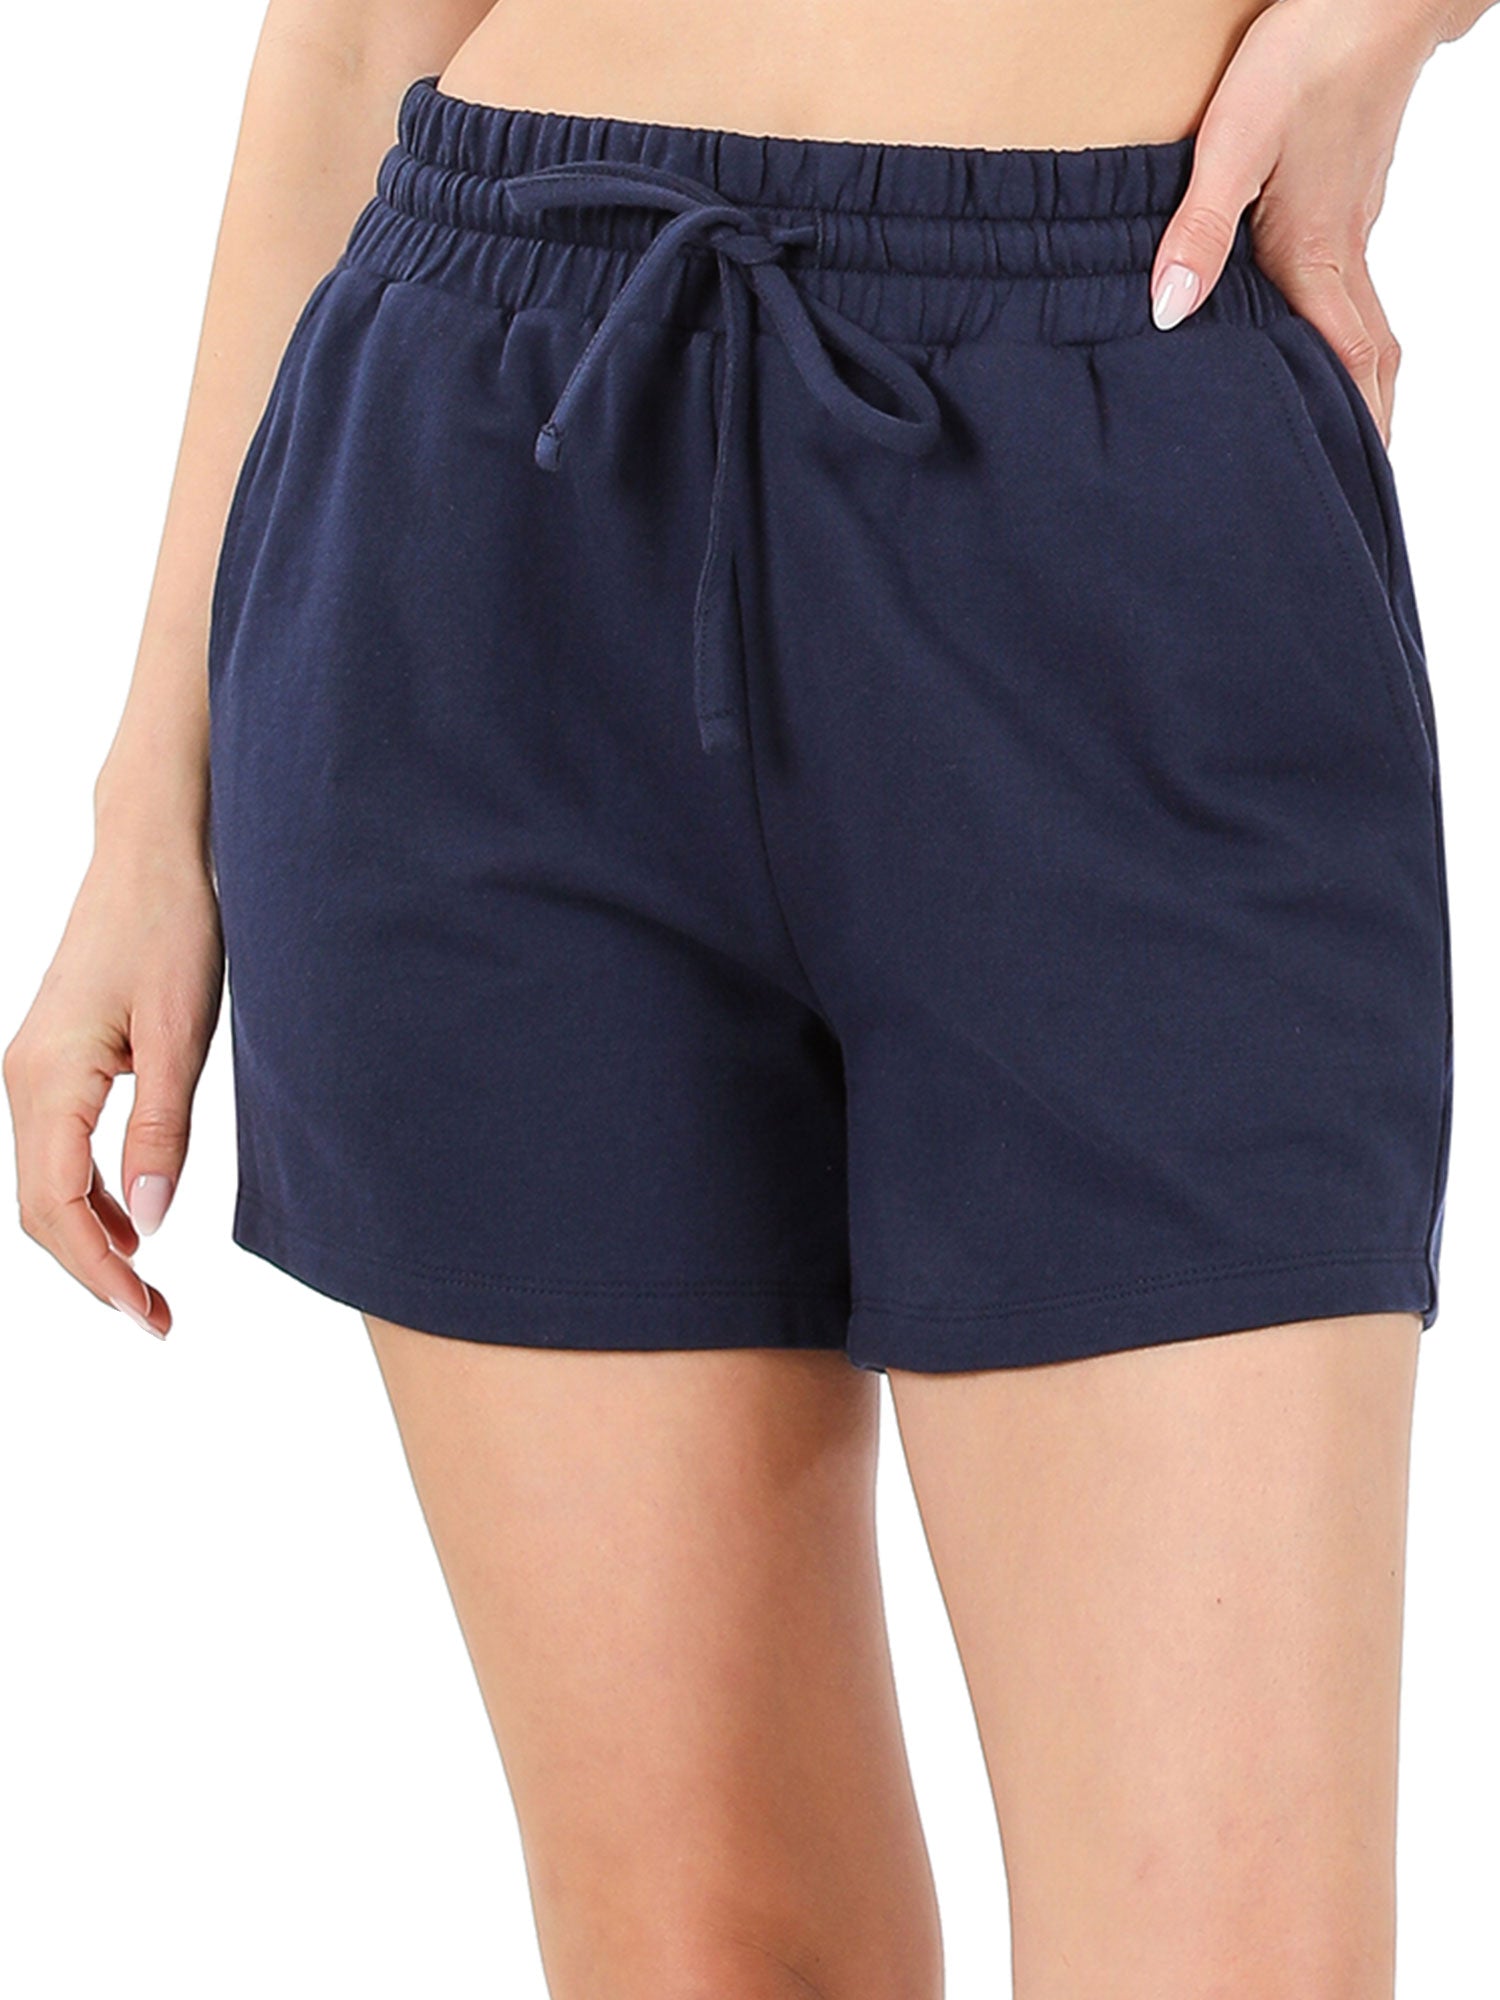 KOGMO Womens Comfy French Terry Shorts